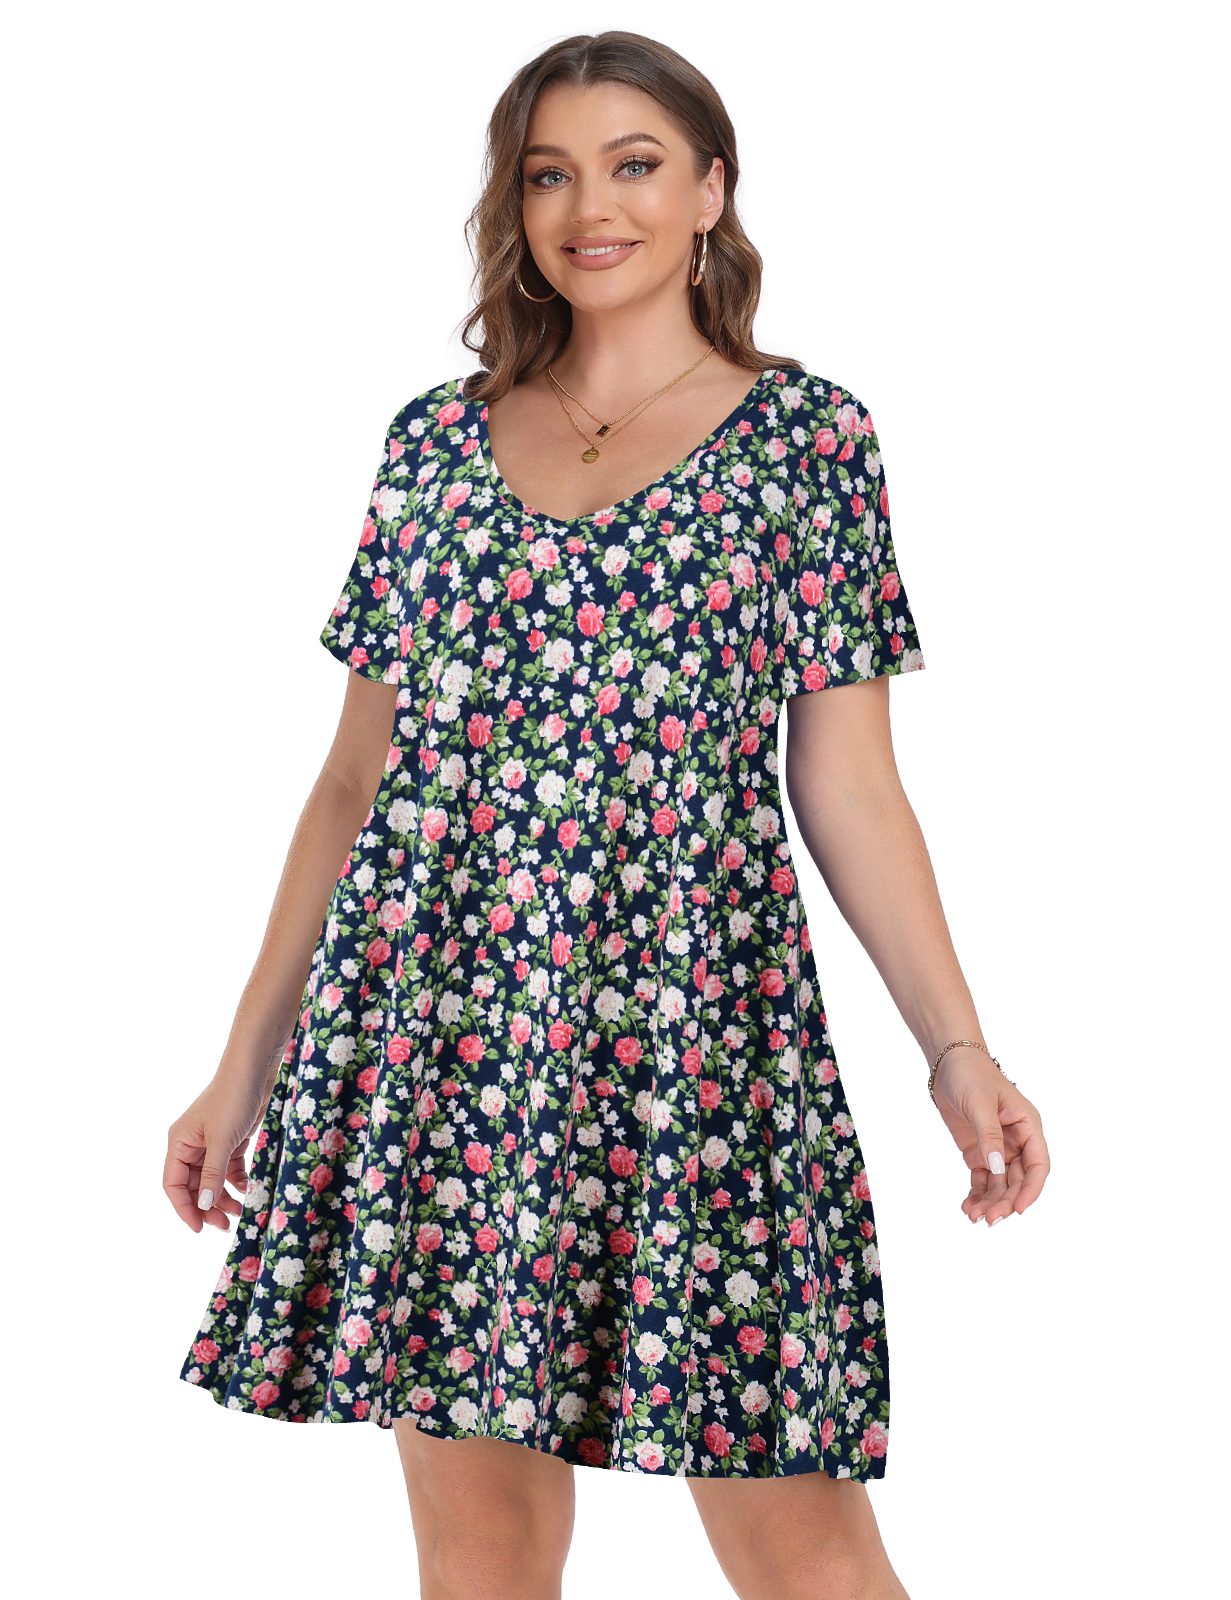 Plus Size Dresses 2X for Women, VEPKUL V Neck T Shirt Dress 2024 Short Sleeve Casual Loose Swing Summer Dress Floral Printed with Pockets - image 5 of 9